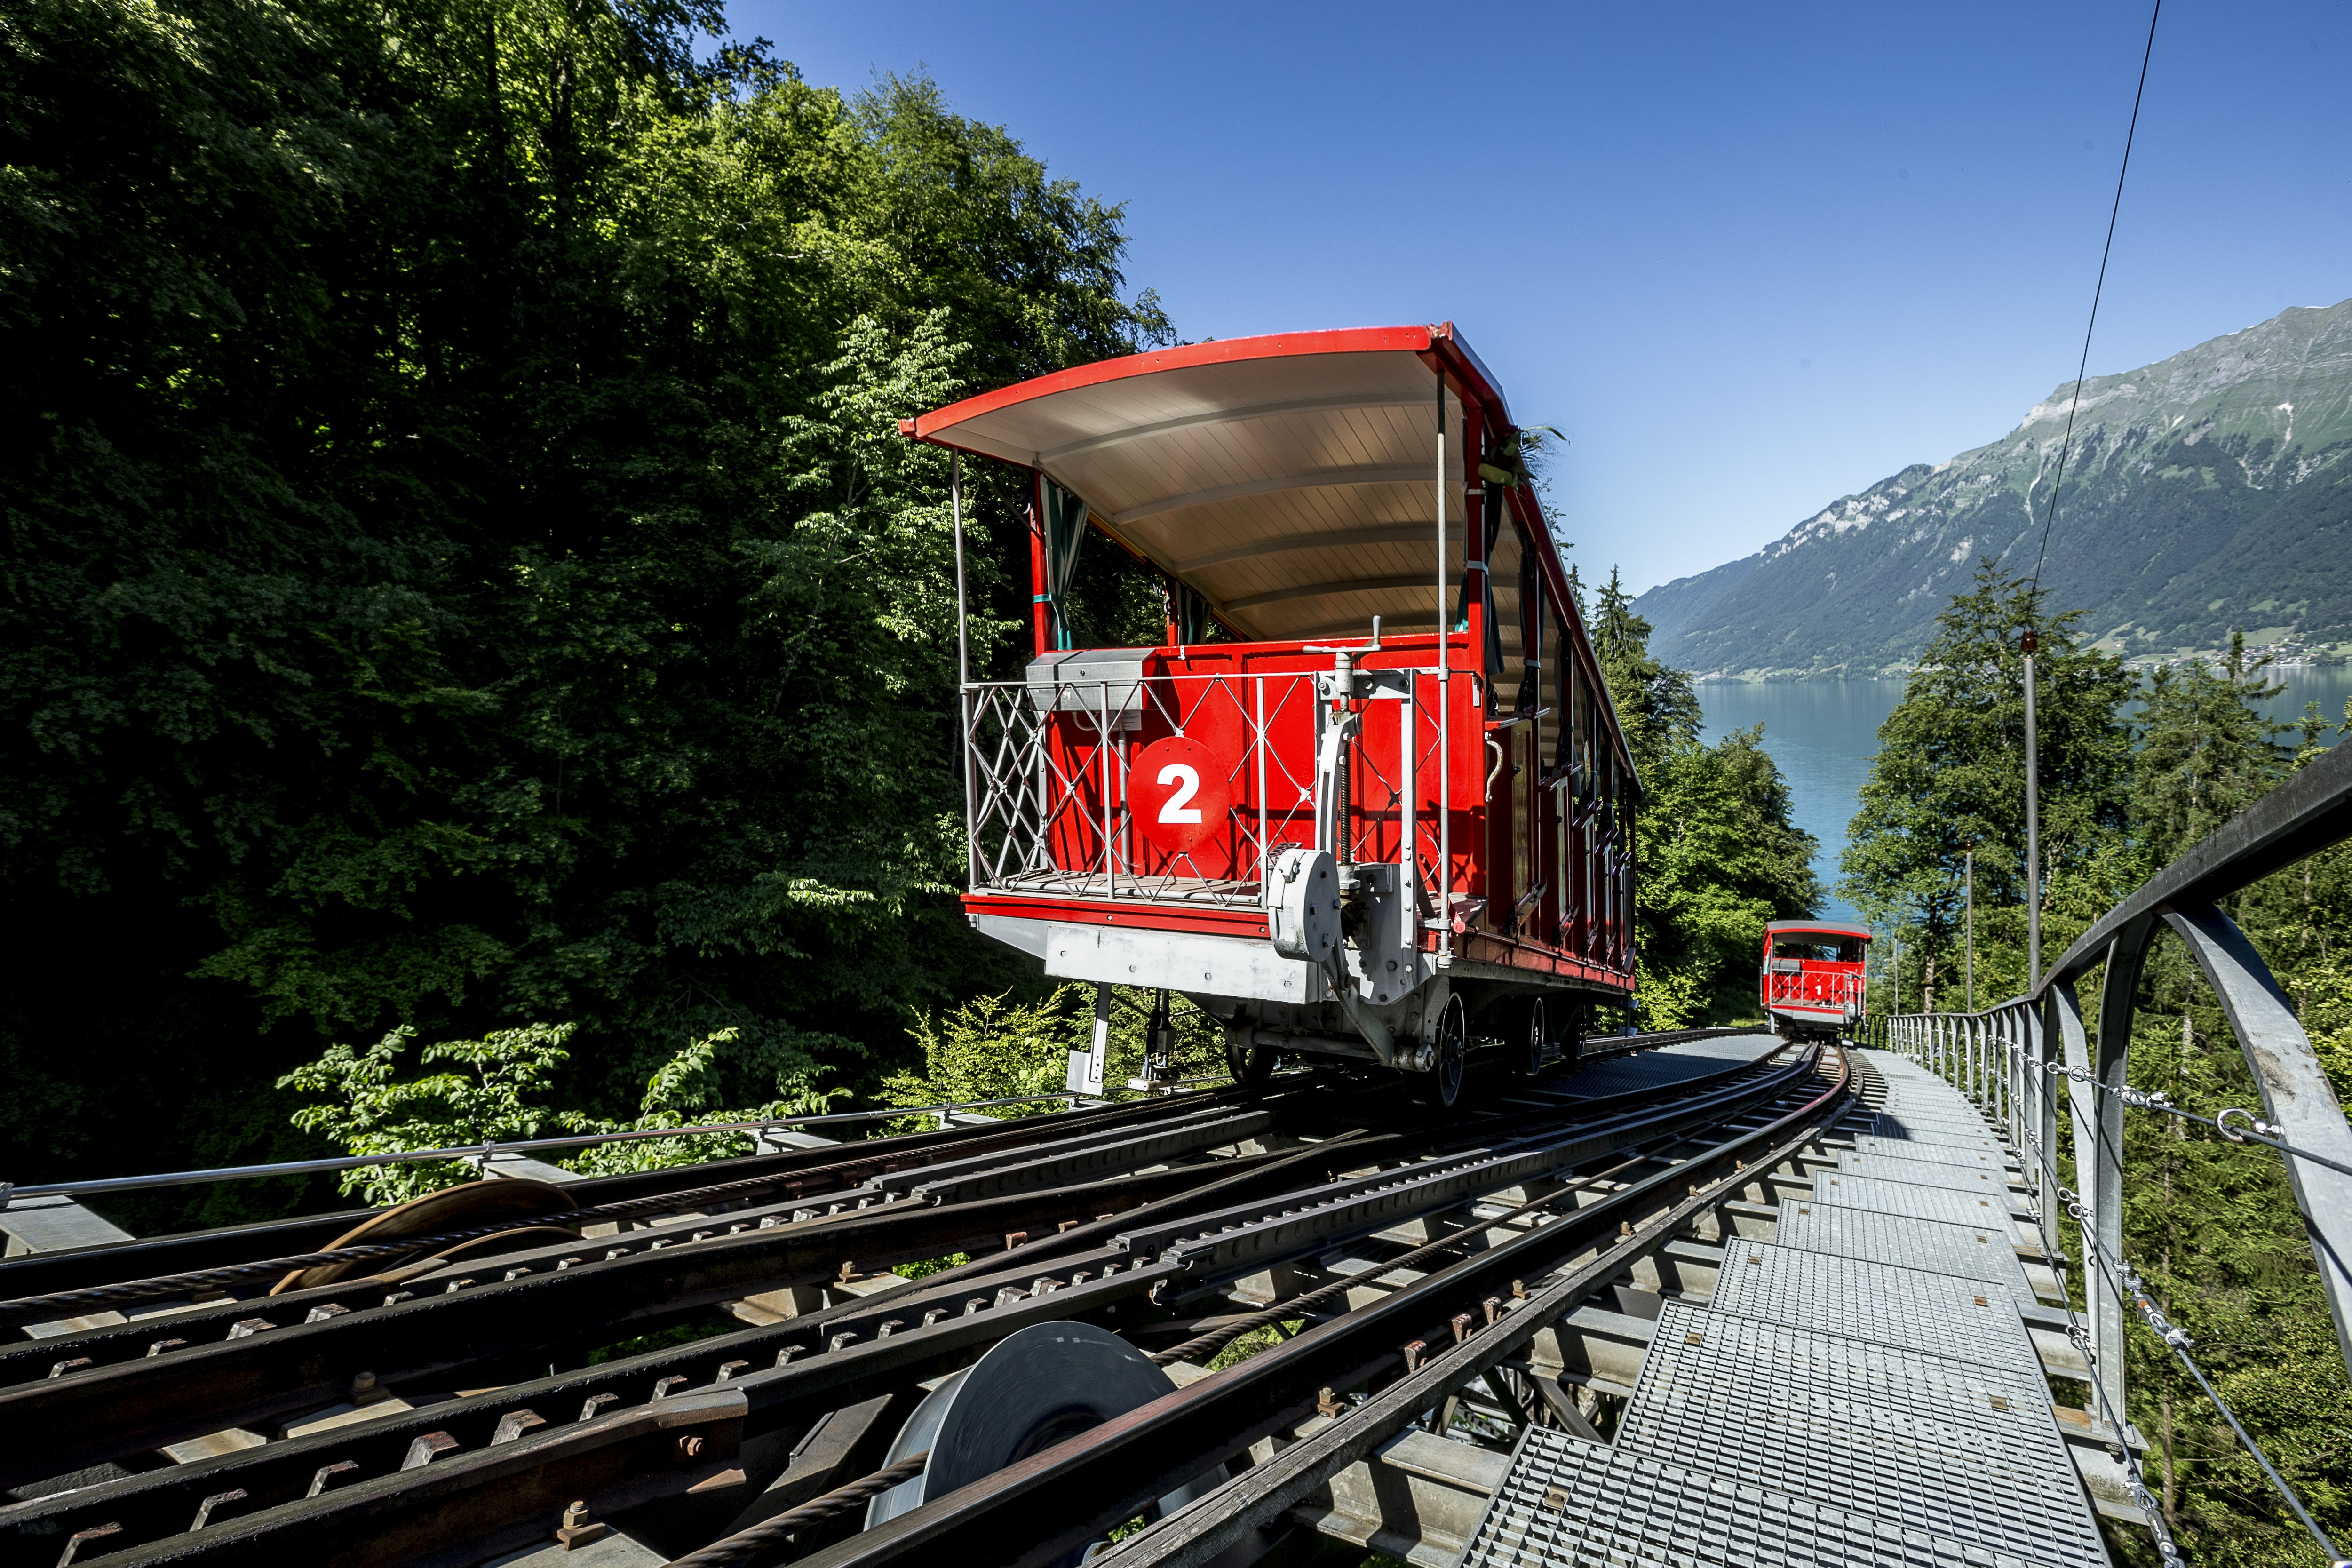 Return journey with the Giessbach funicular